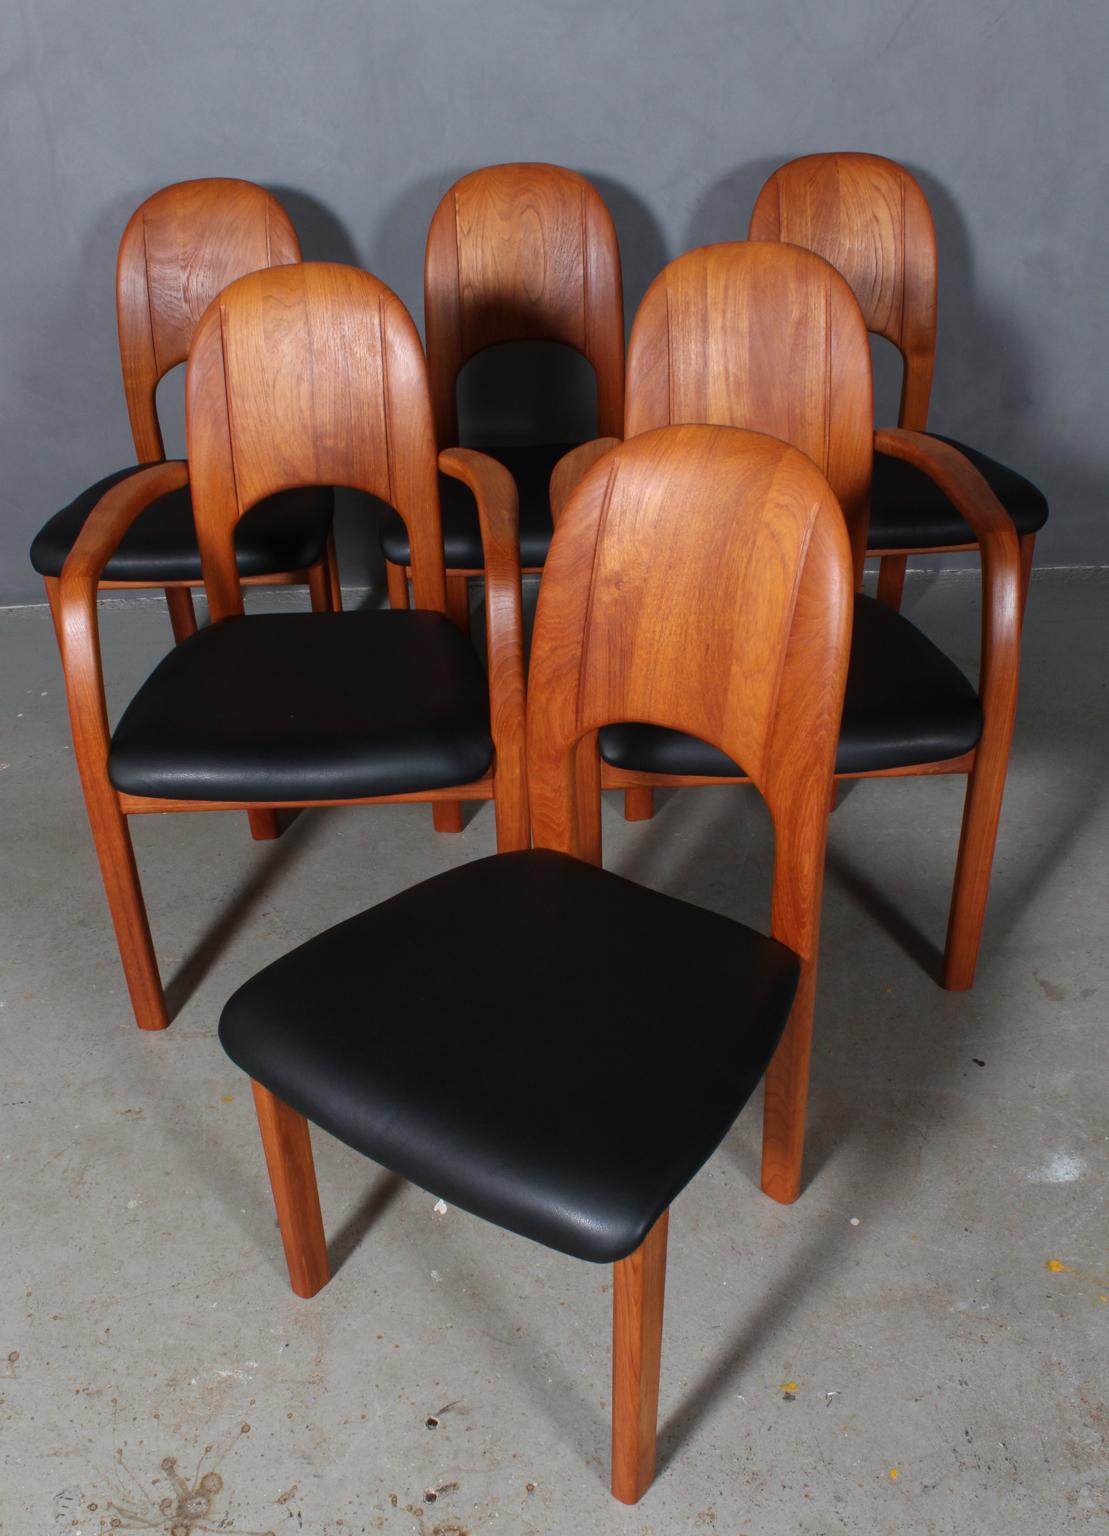 Set of six dining chairs in solid teak, two with armrests. 

New upholsterd with black aniline leather.

Made by Holstebro Möbelfabrik.